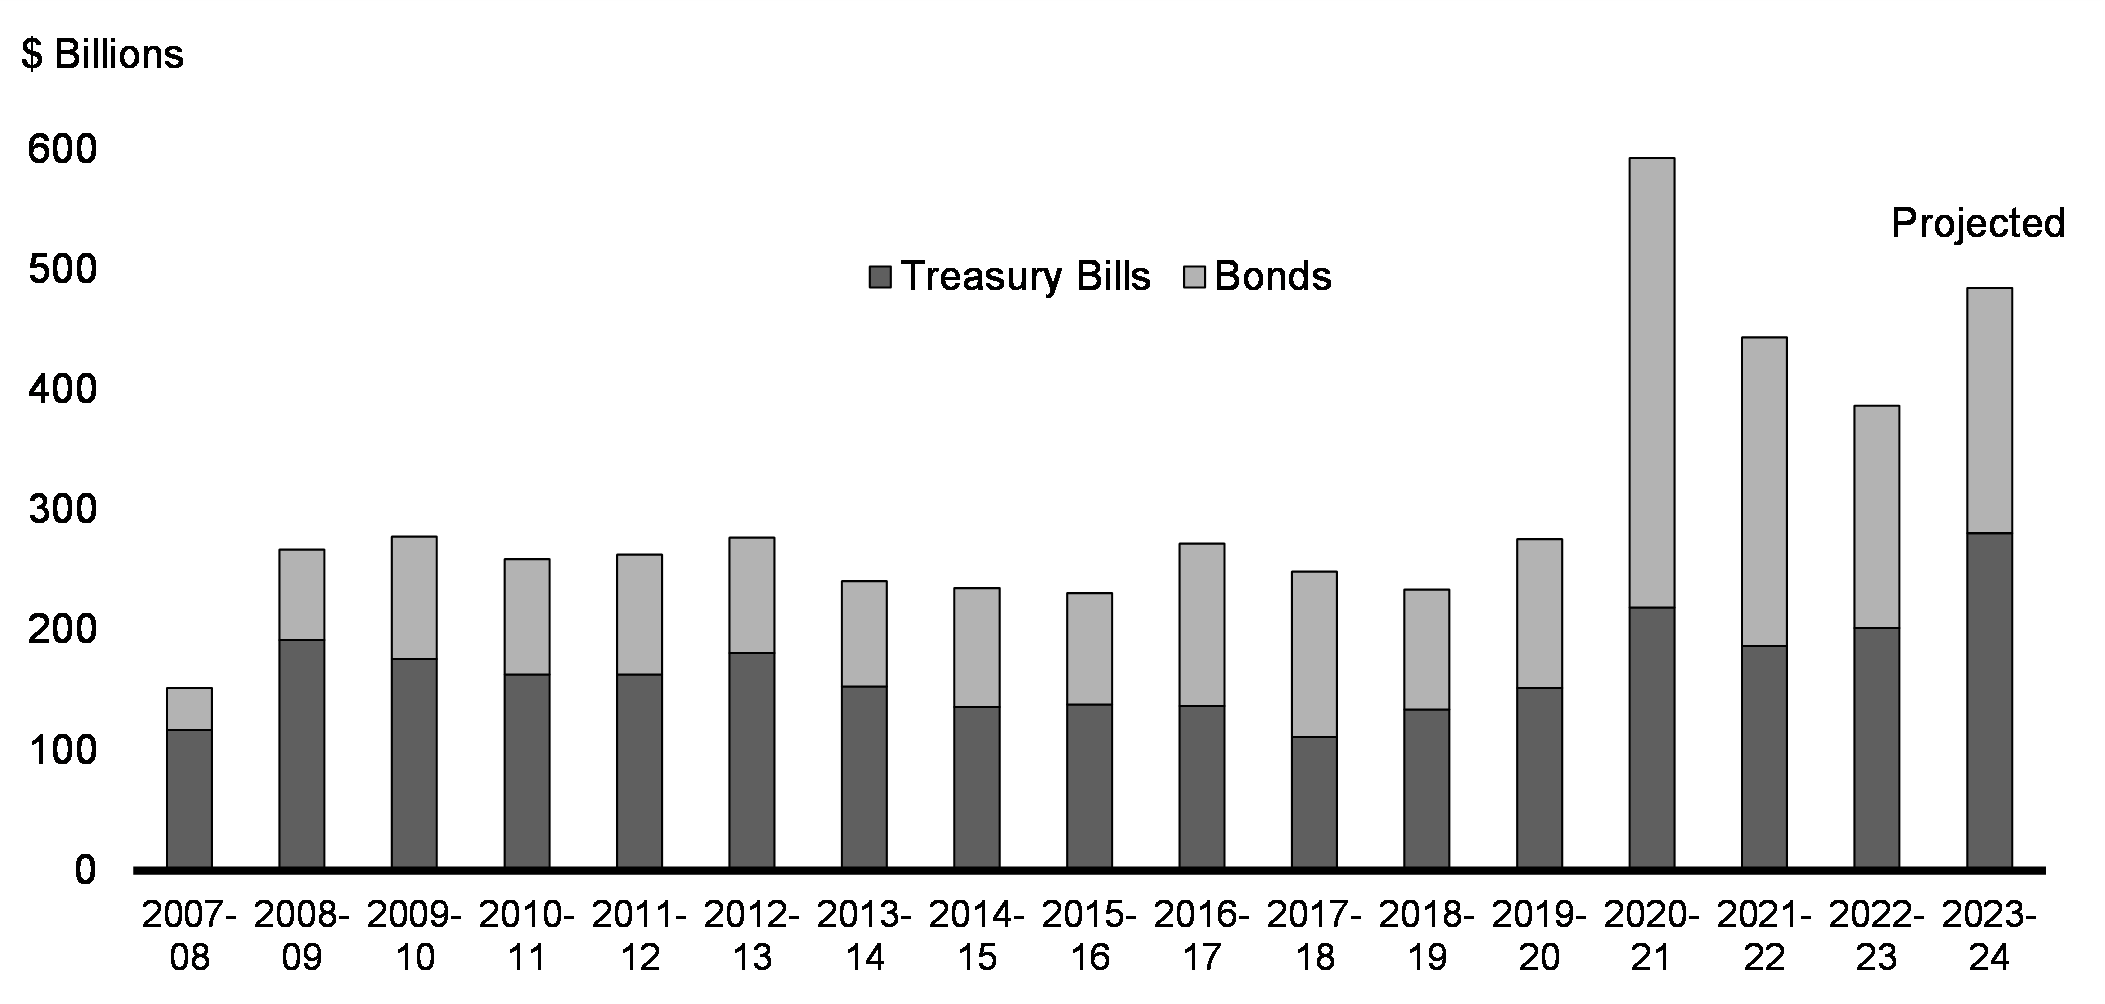 Chart A2.2: Government of Canada Total Gross Treasury Bill and Bond Issuance by Fiscal Year